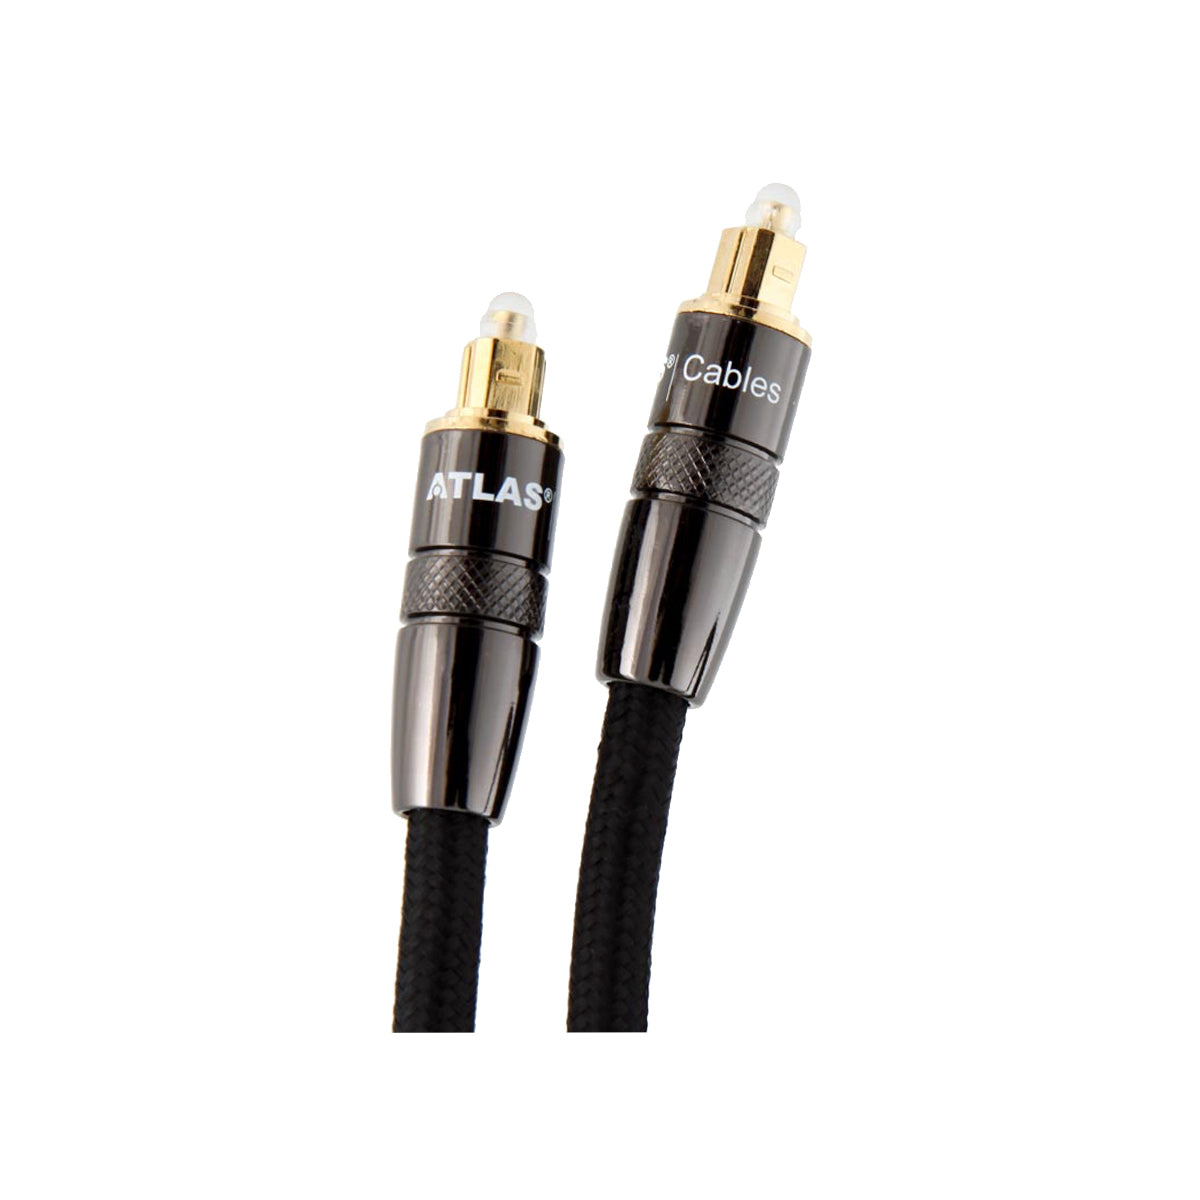 Atlas Mavros Glass Optical Cable at Audio Influence